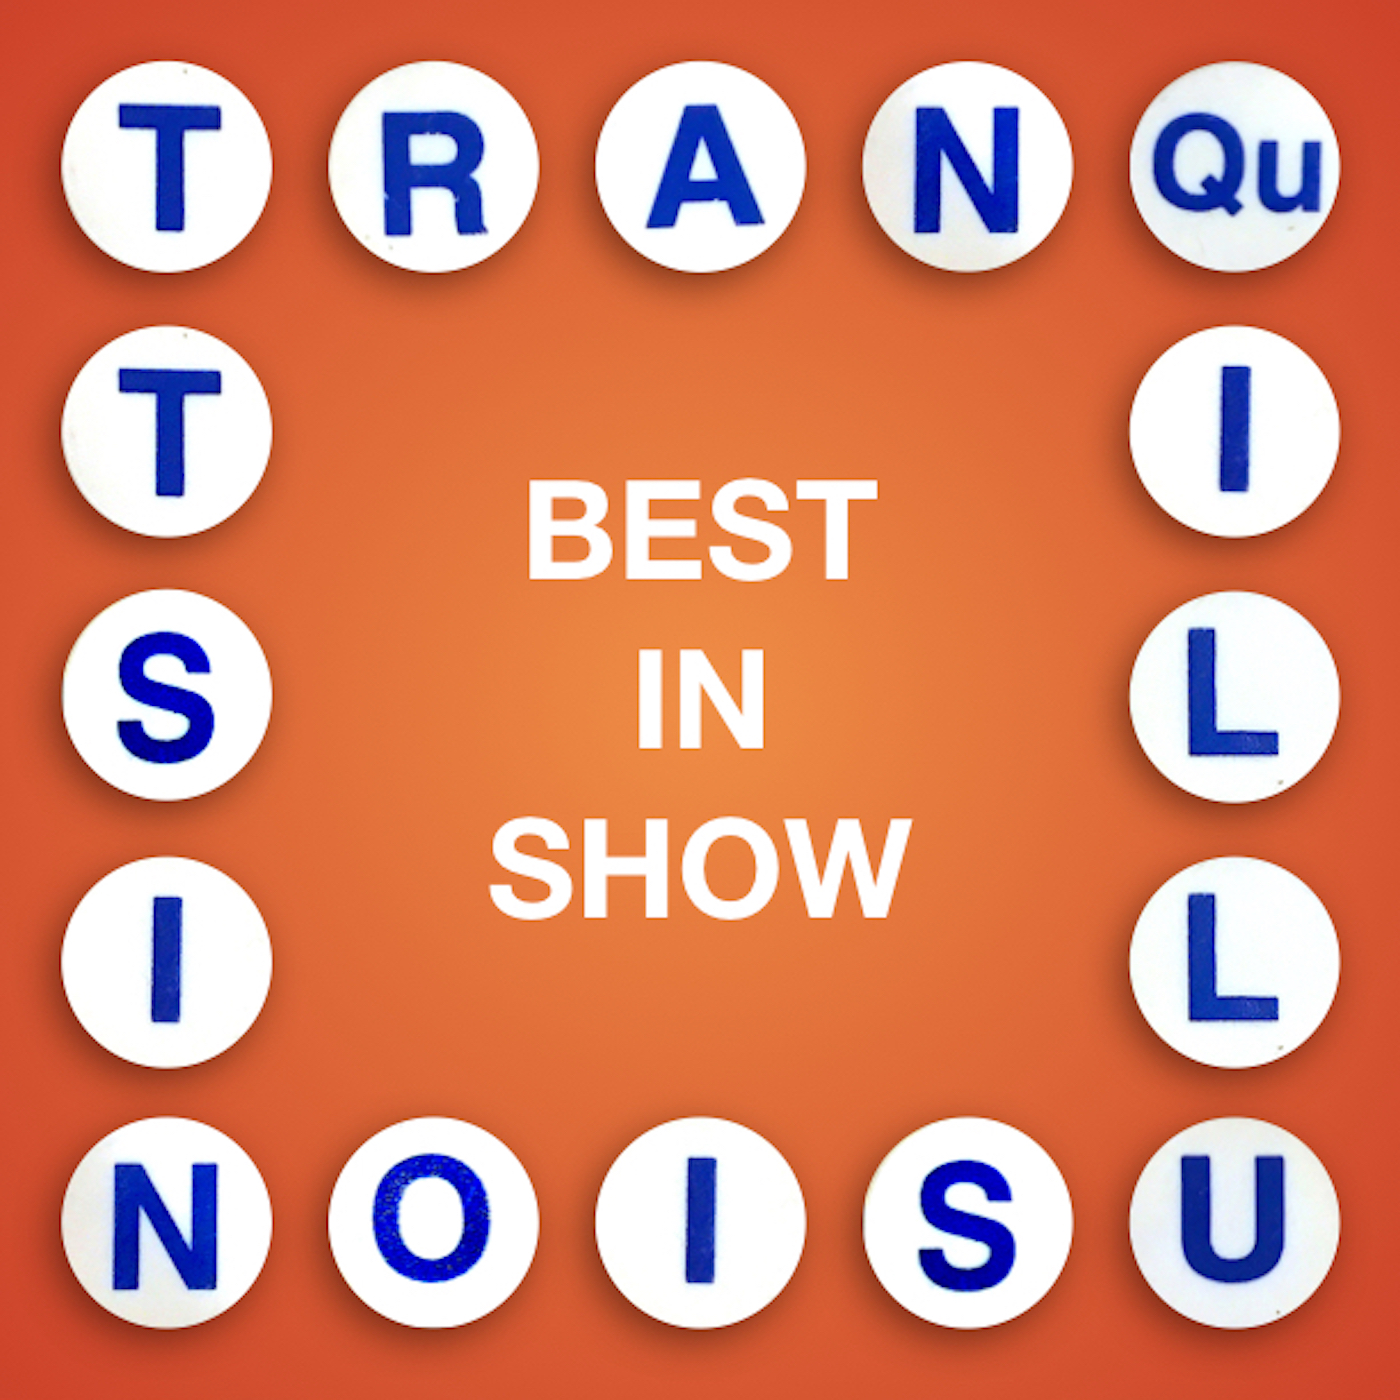 Thumbnail for "Tranquillusionist: Best In Show".